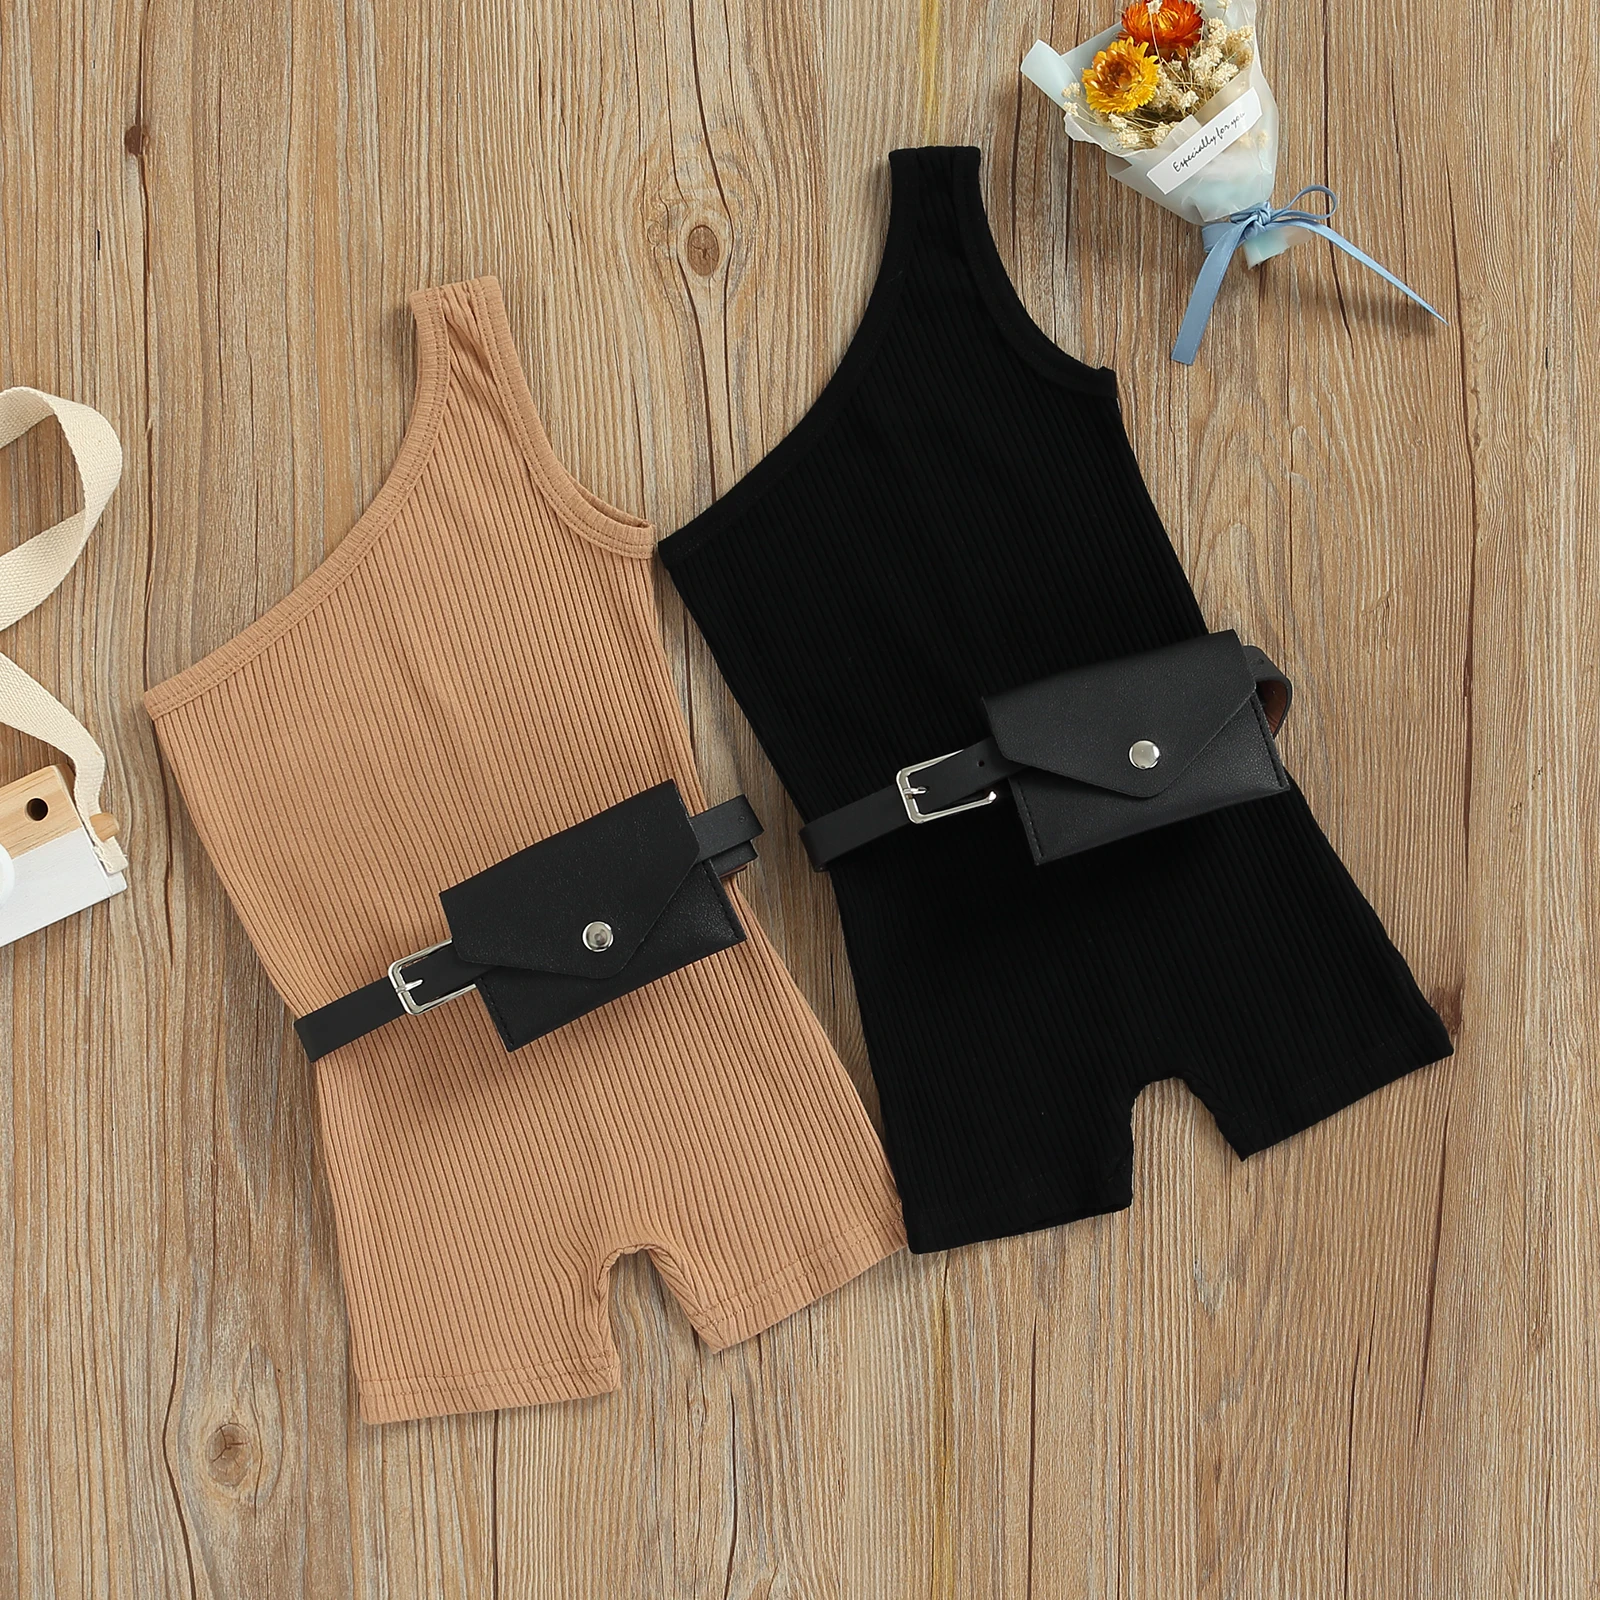 

Kid Baby Girl One Shoulder Playsuit, Oblique Shoulder Sleeveless Plain Color Romper with Belt, Casual Simple Clothes 1-6T